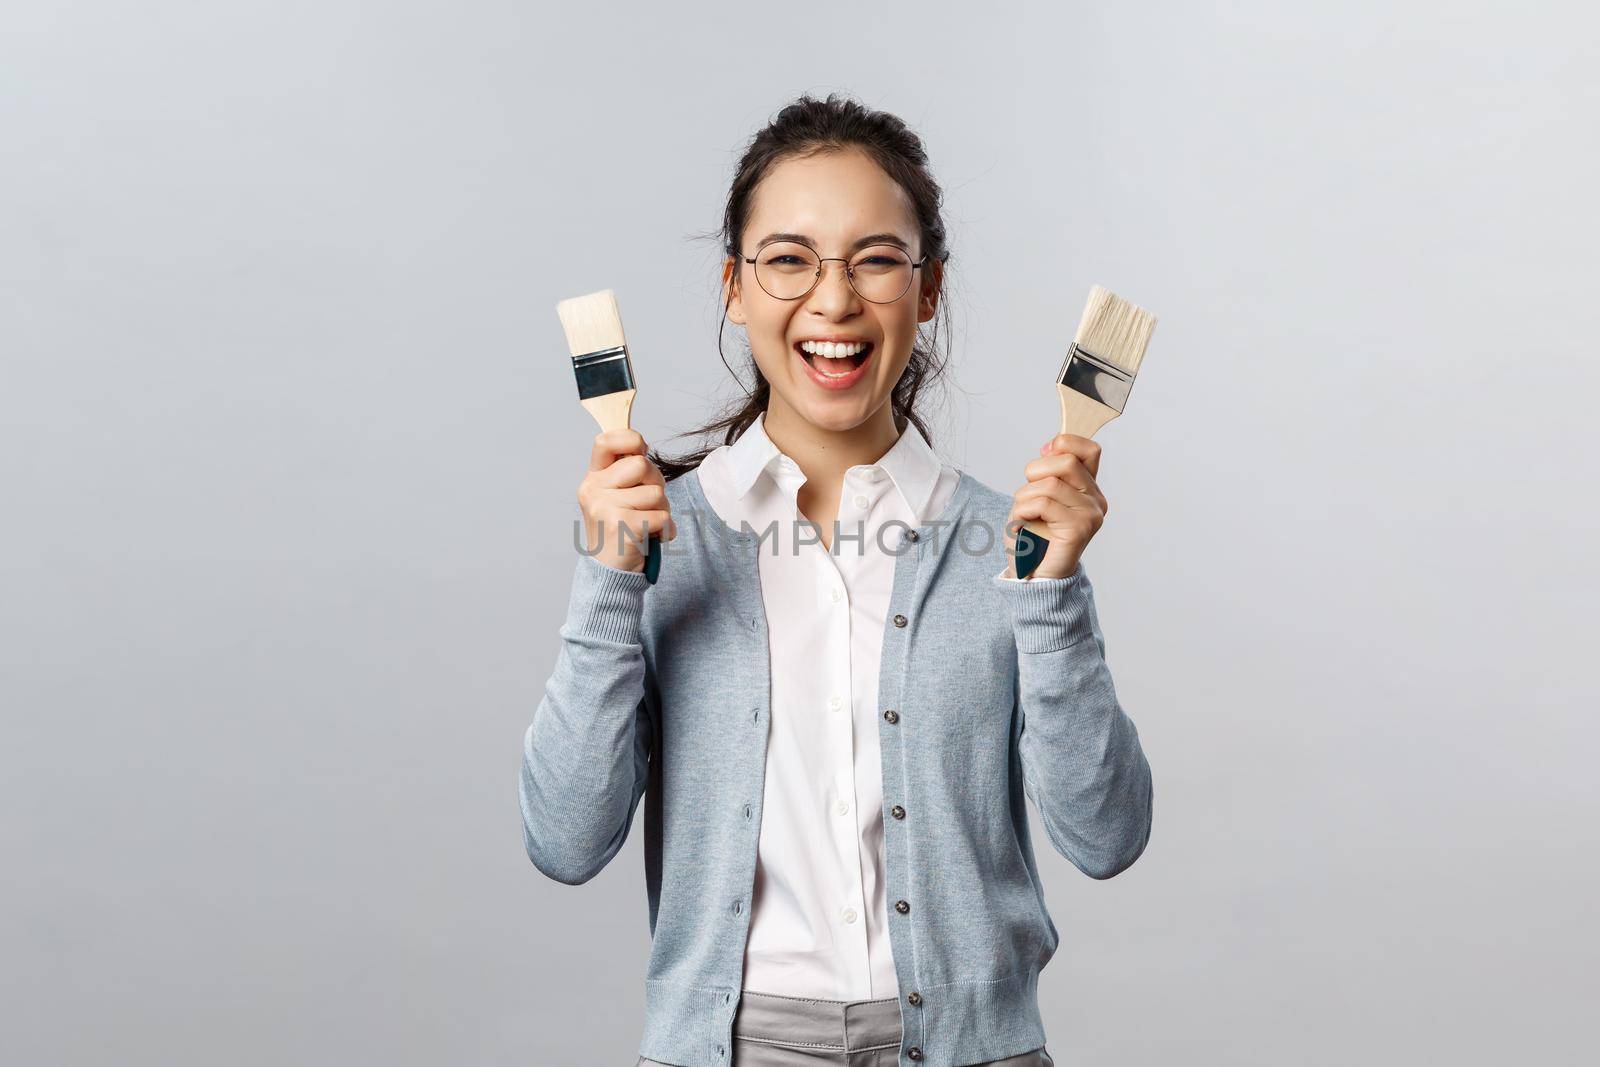 Creativity, repairs and overhaul concept. Excited happy, smiling asian woman holding two painting brushes and laughing with rejoice, cant wait to pain her room new color, have overhaul.